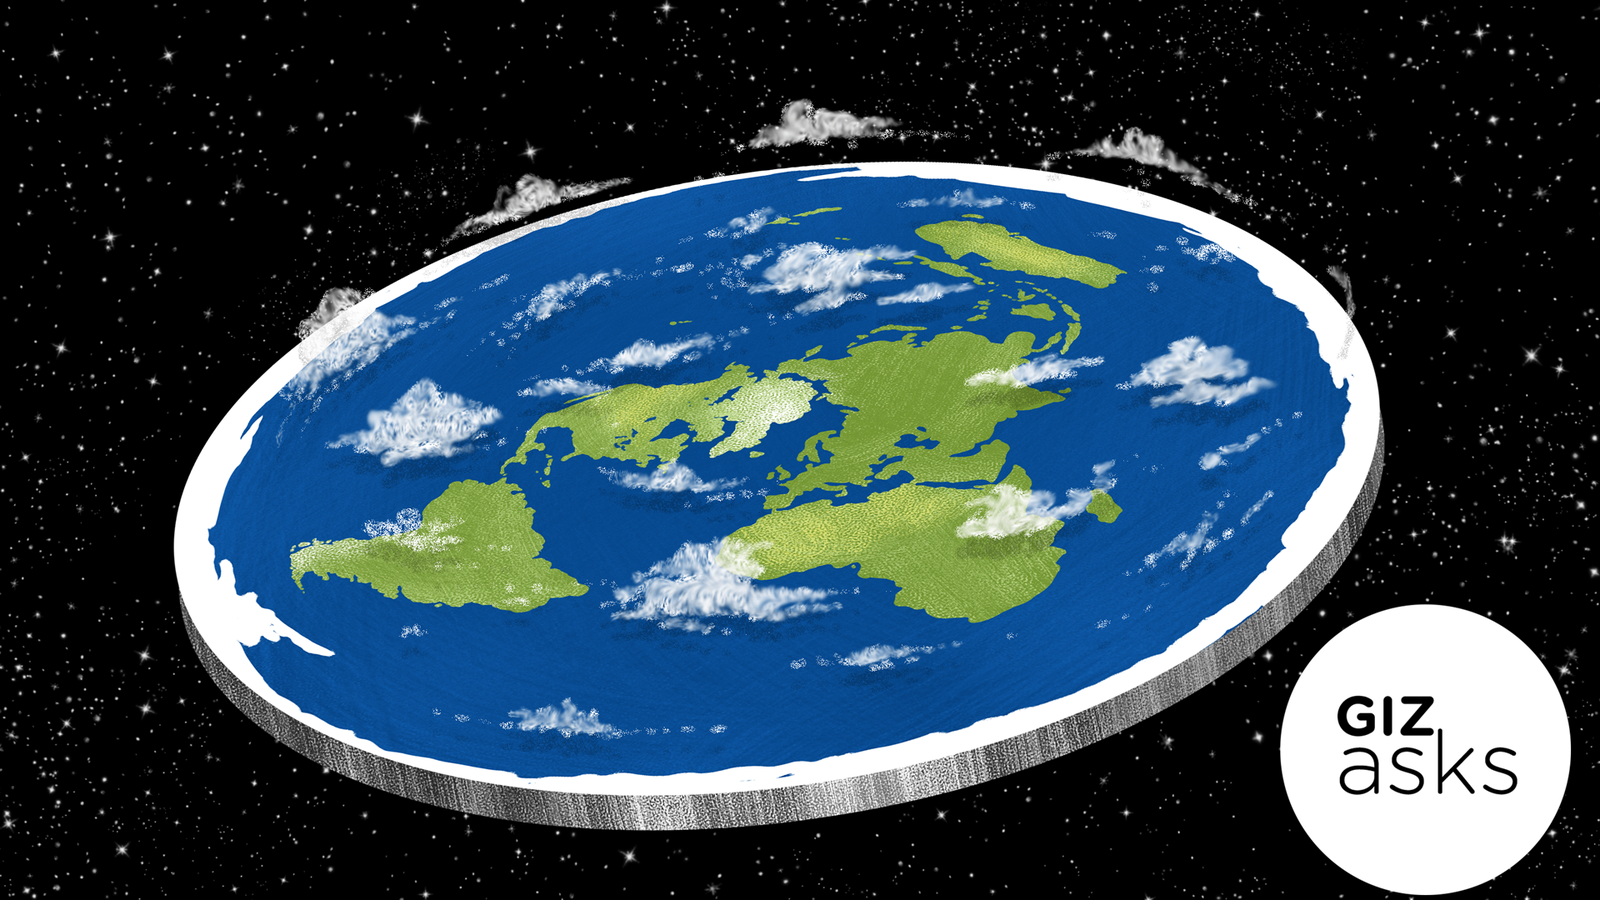 is the earth flat or round say that it is flat